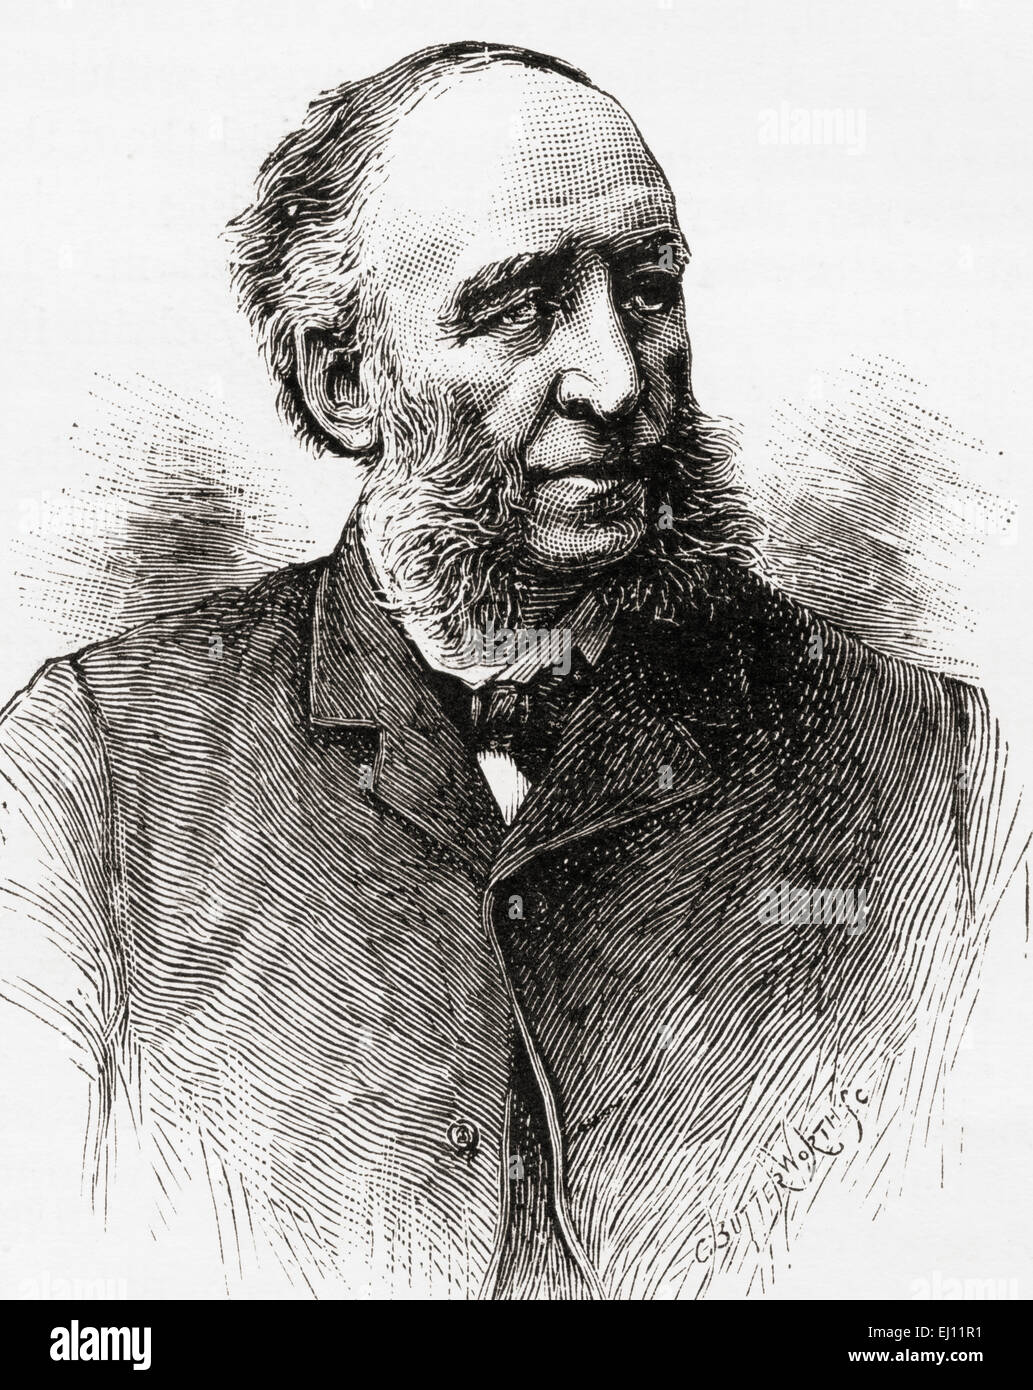 Jules François Camille Ferry, 1832 – 1893. French statesman and republican. - jules-franois-camille-ferry-1832-1893-french-statesman-and-republican-EJ11R1